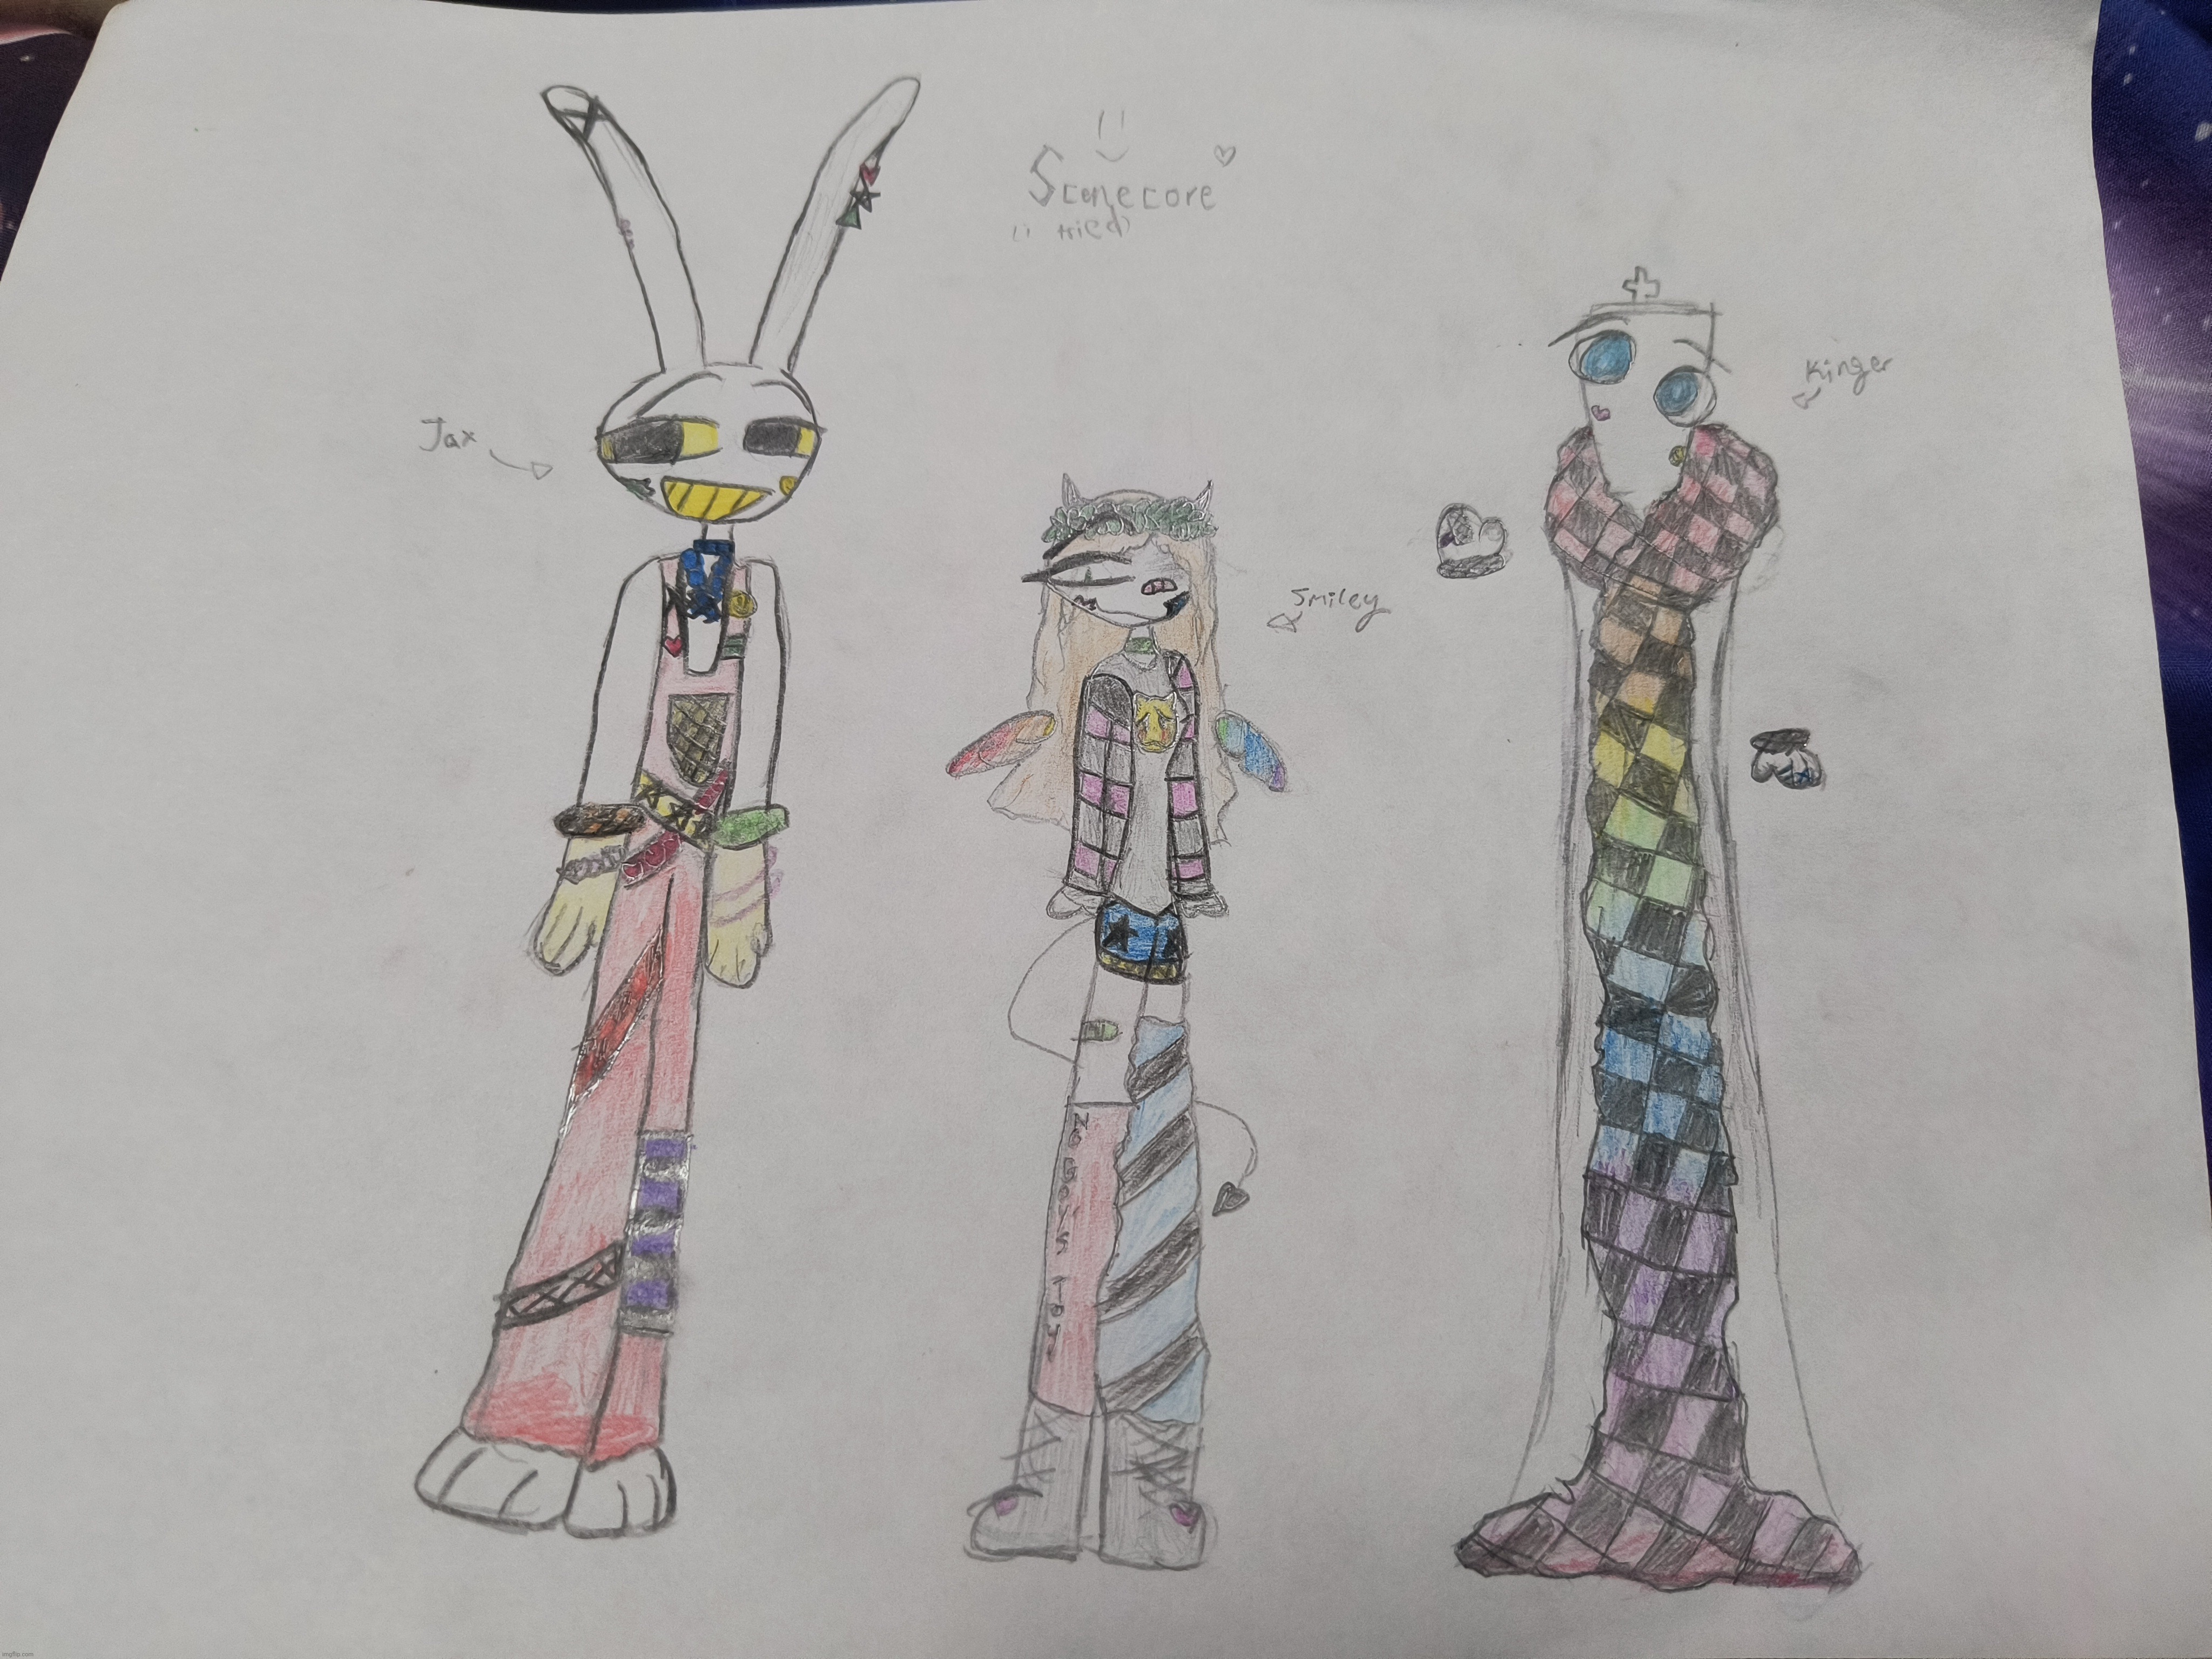 scenecore smiley (tadc oc), Jax, and kinger --- this took FOREVER, especially kinger (i don't color skin :skull:) | image tagged in the amazing digital circus,doing full body in color was weird,might not do it again,but im still very proud of this | made w/ Imgflip meme maker